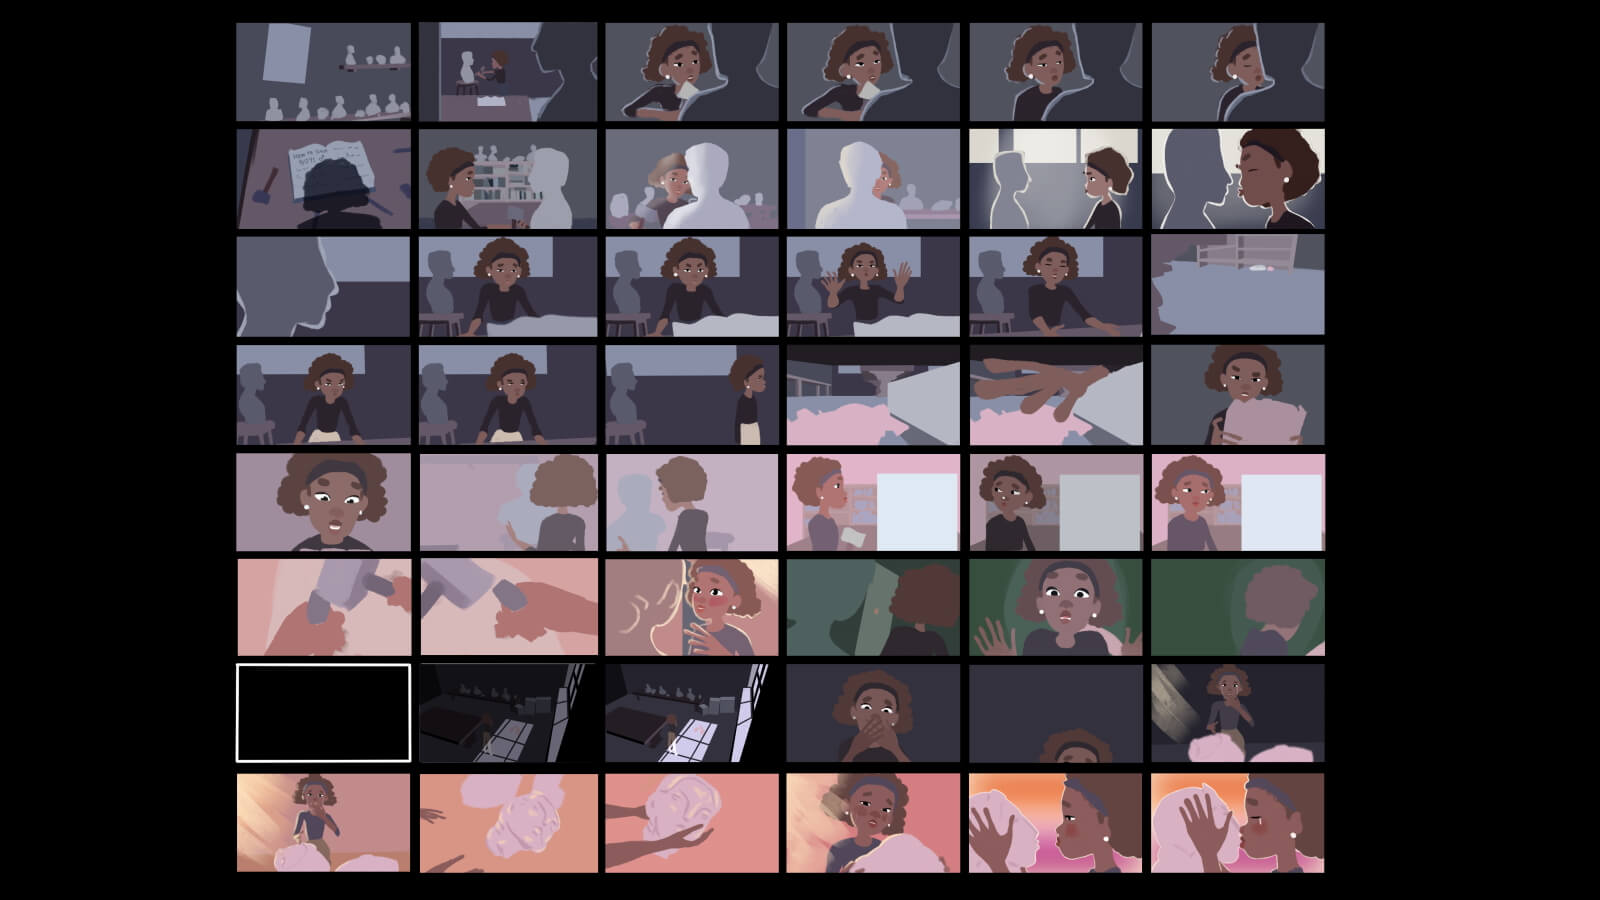 Storyboard of SAFO, showing key scenes and character actions.